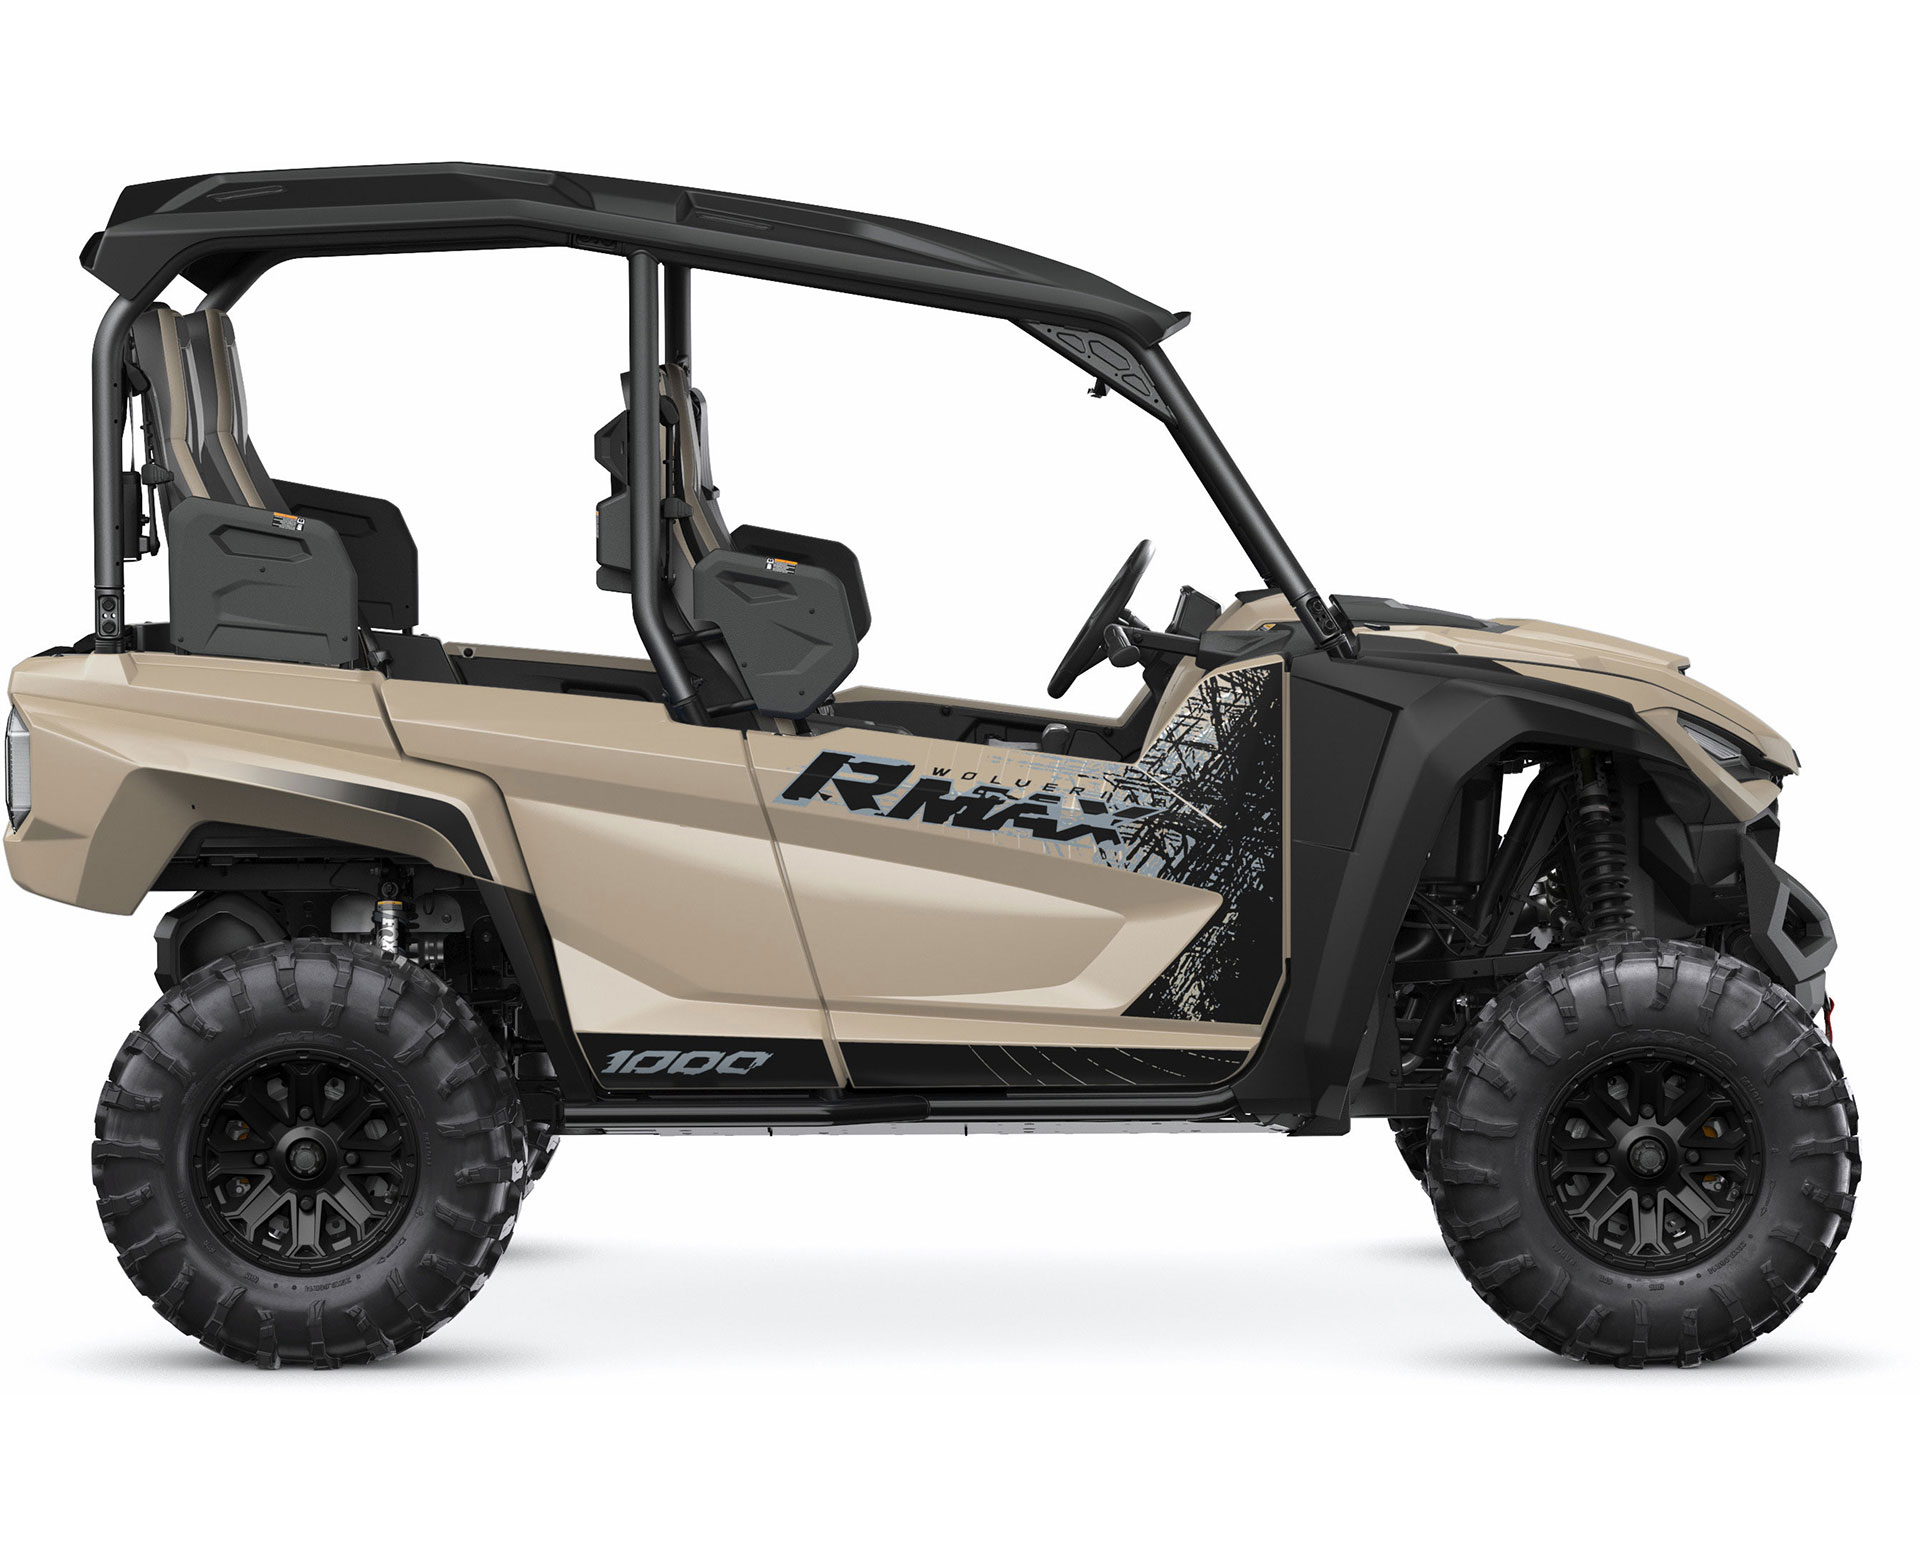 Thumbnail of your customized 2023 WOLVERINE® RMAX4™ 1000 SE